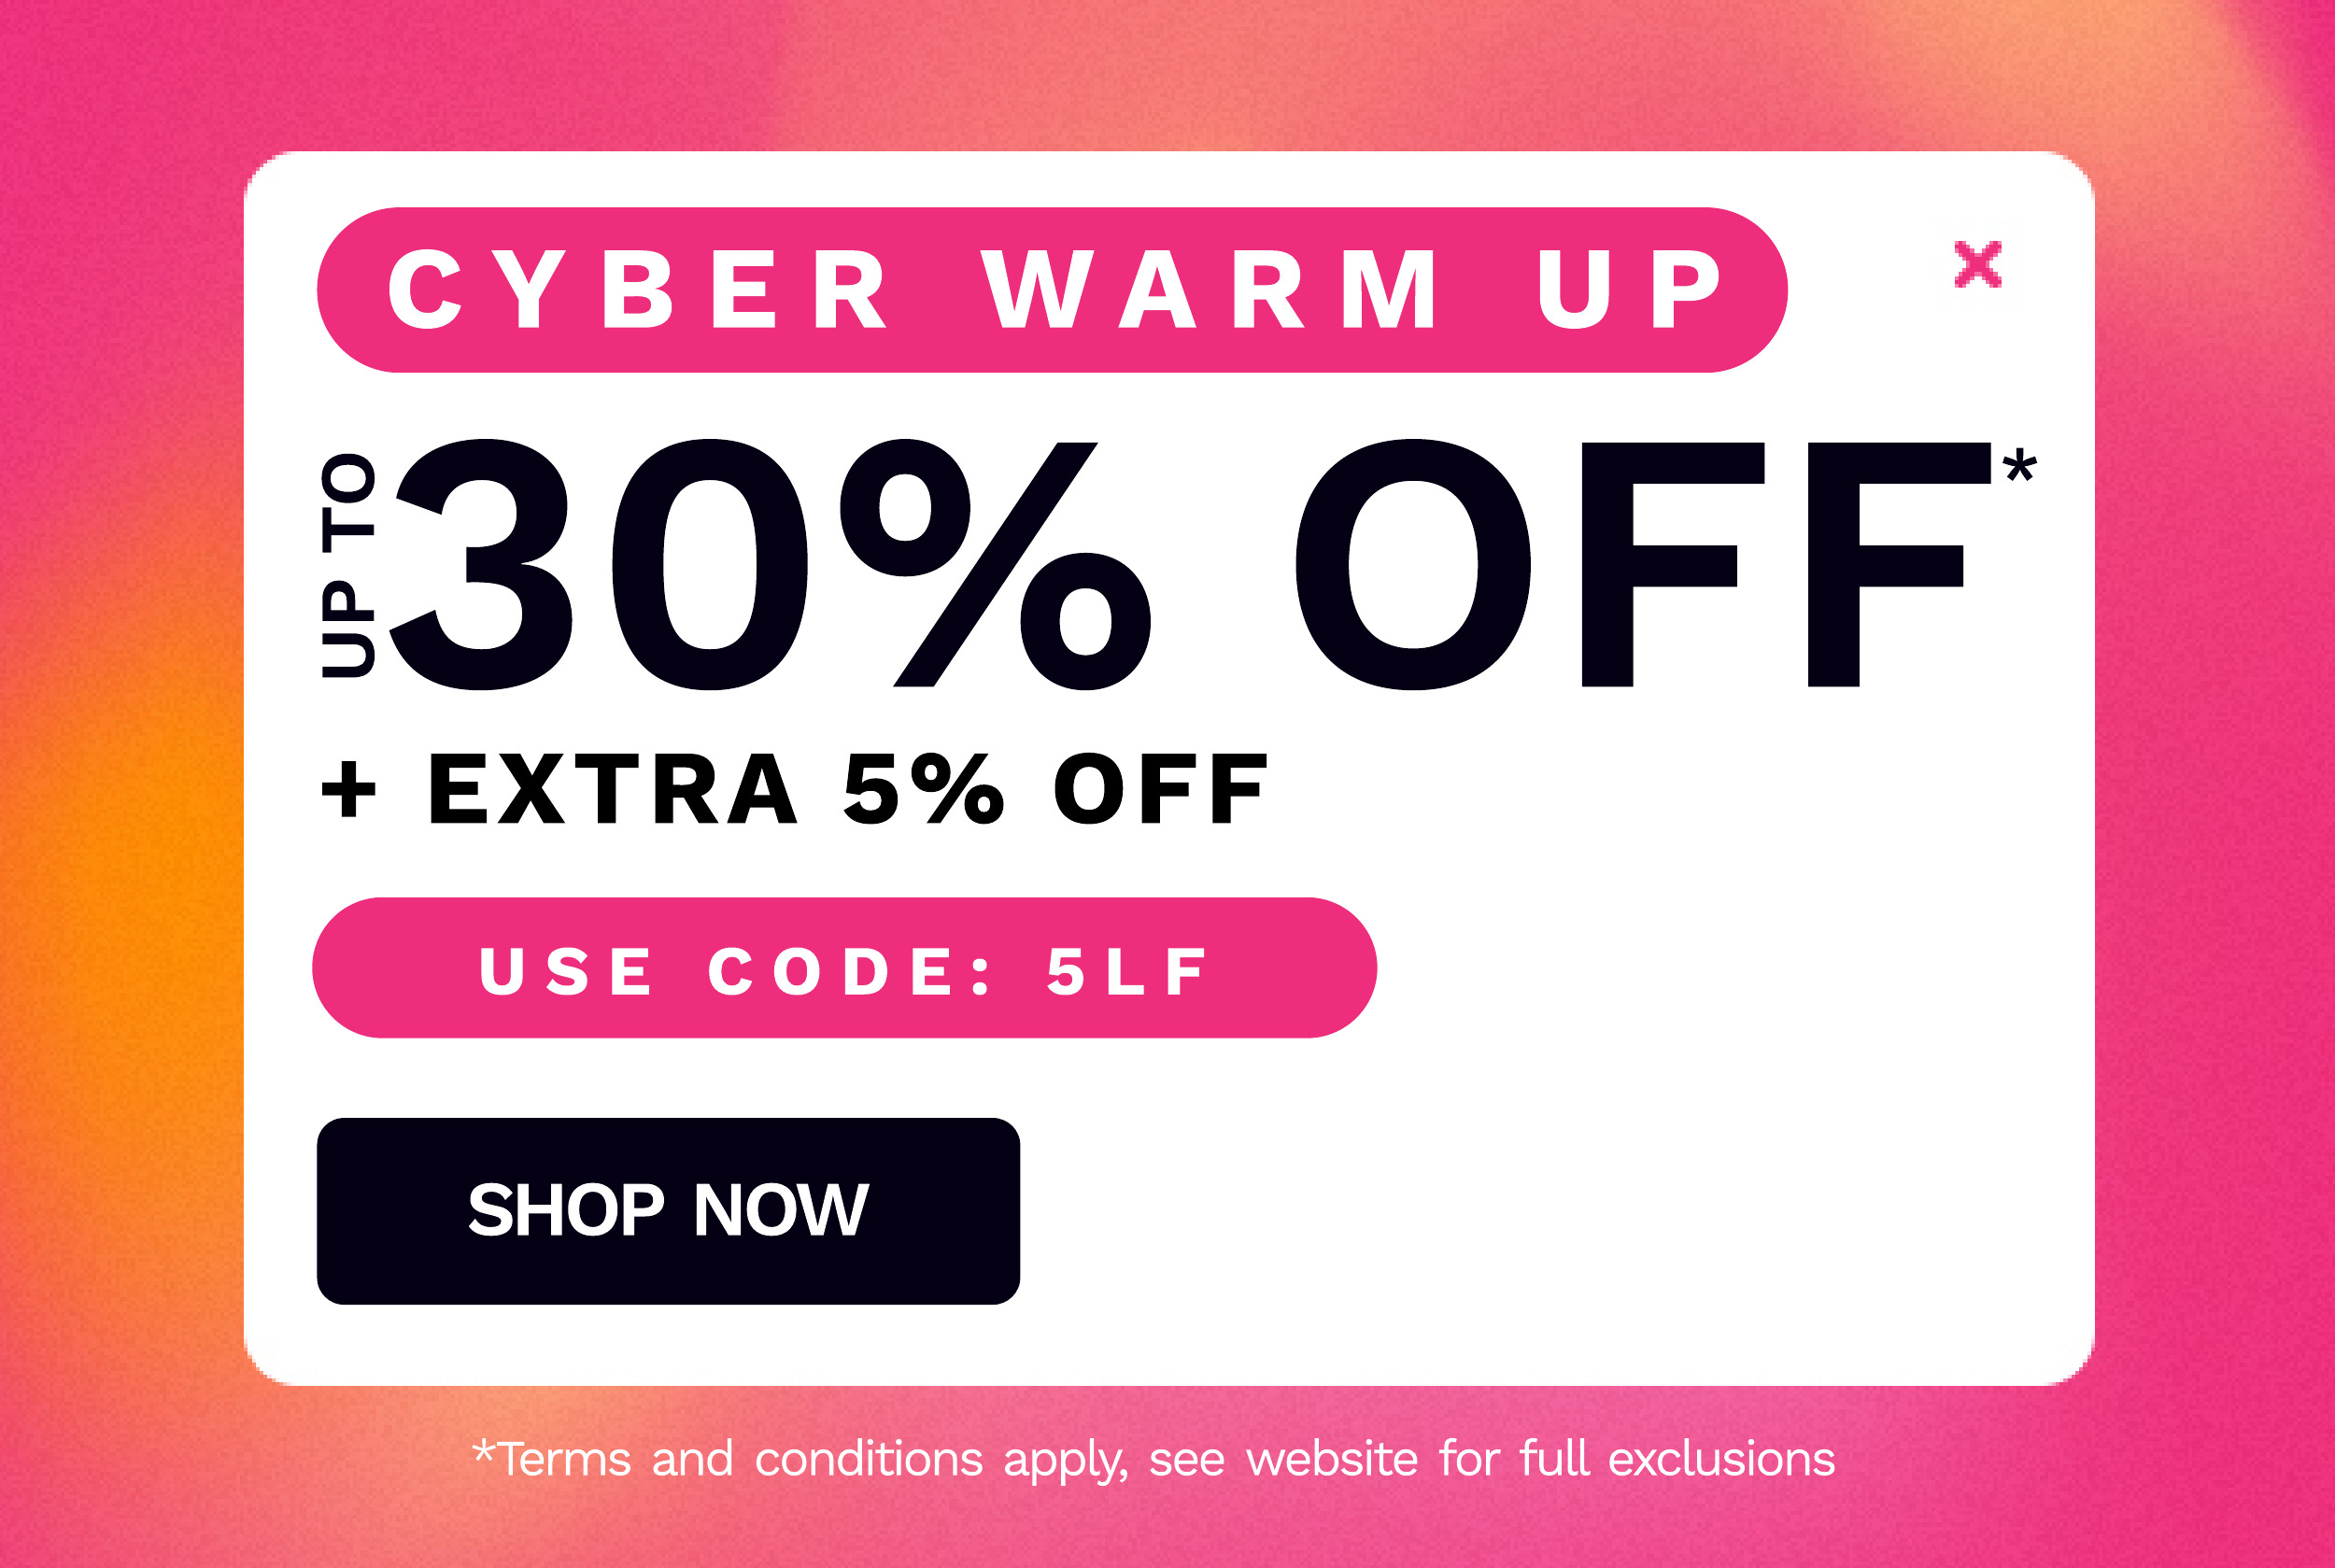 CYBER WARM UP UP TO 30 PERCENT OFF